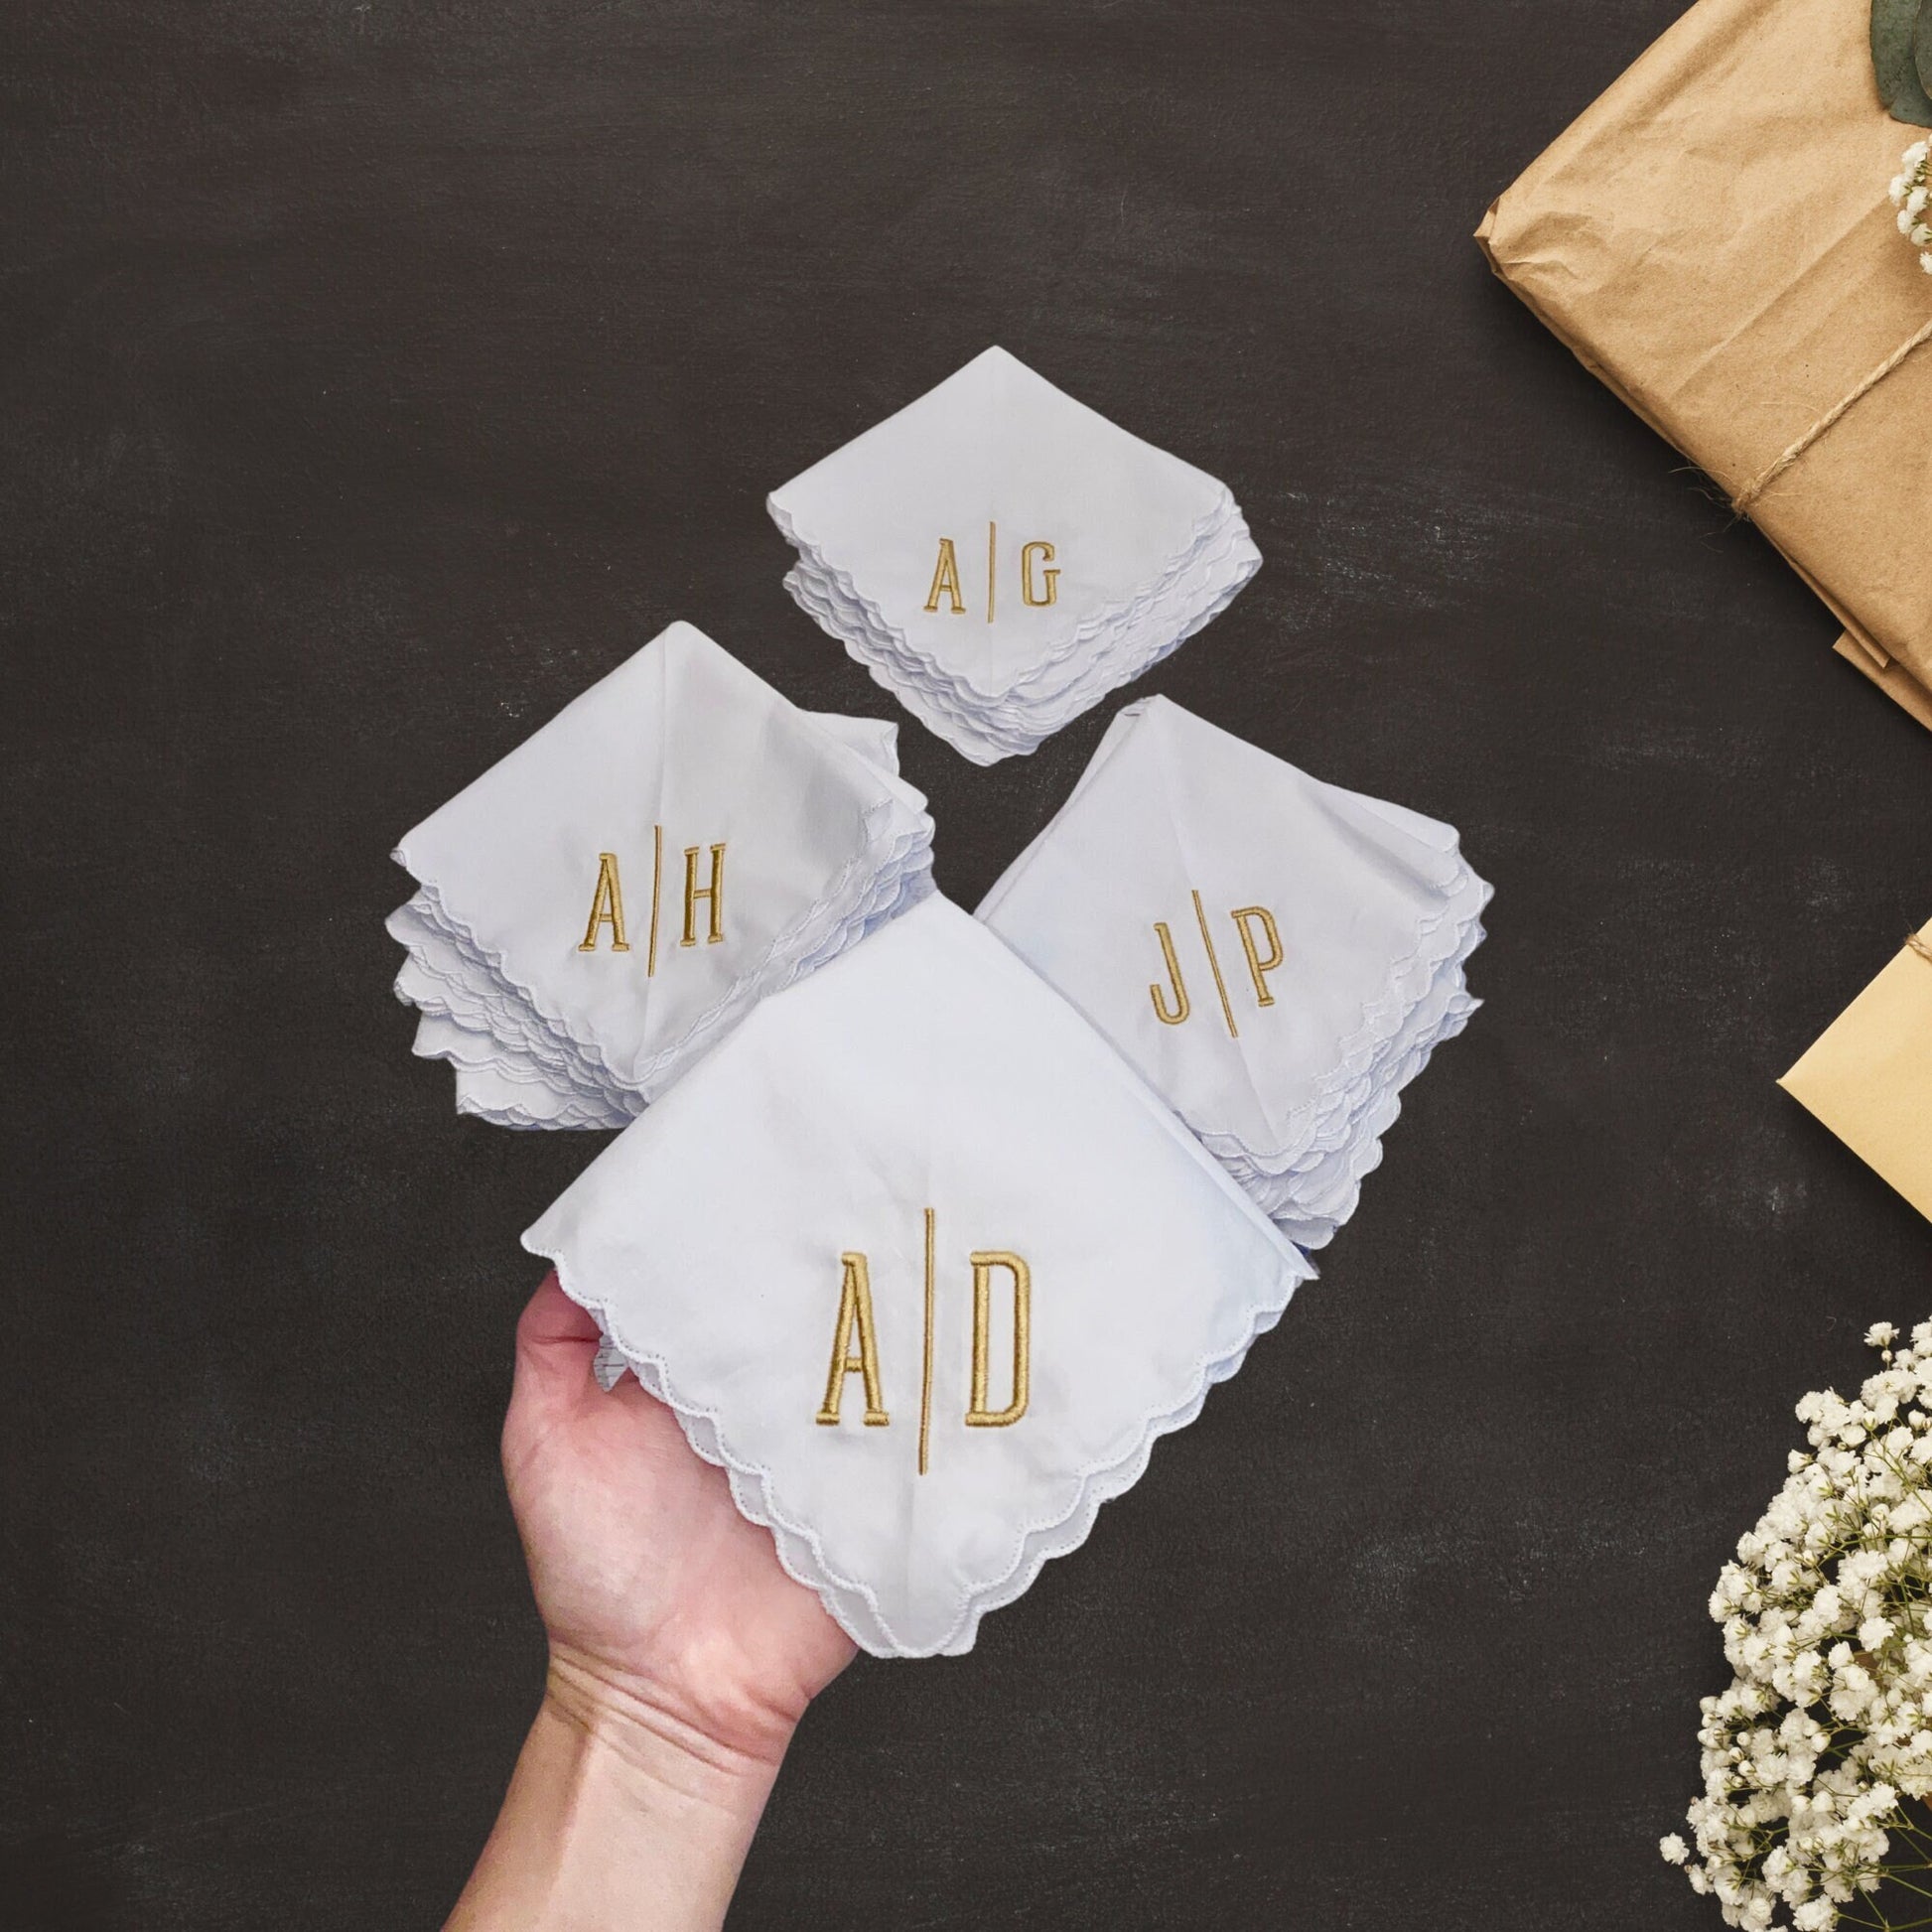 Monogrammed Handkerchiefs for Weddings and Special Occasions, Personalized Cotton Handkerchiefs for Men, Scalloped Edged Handkerchiefs